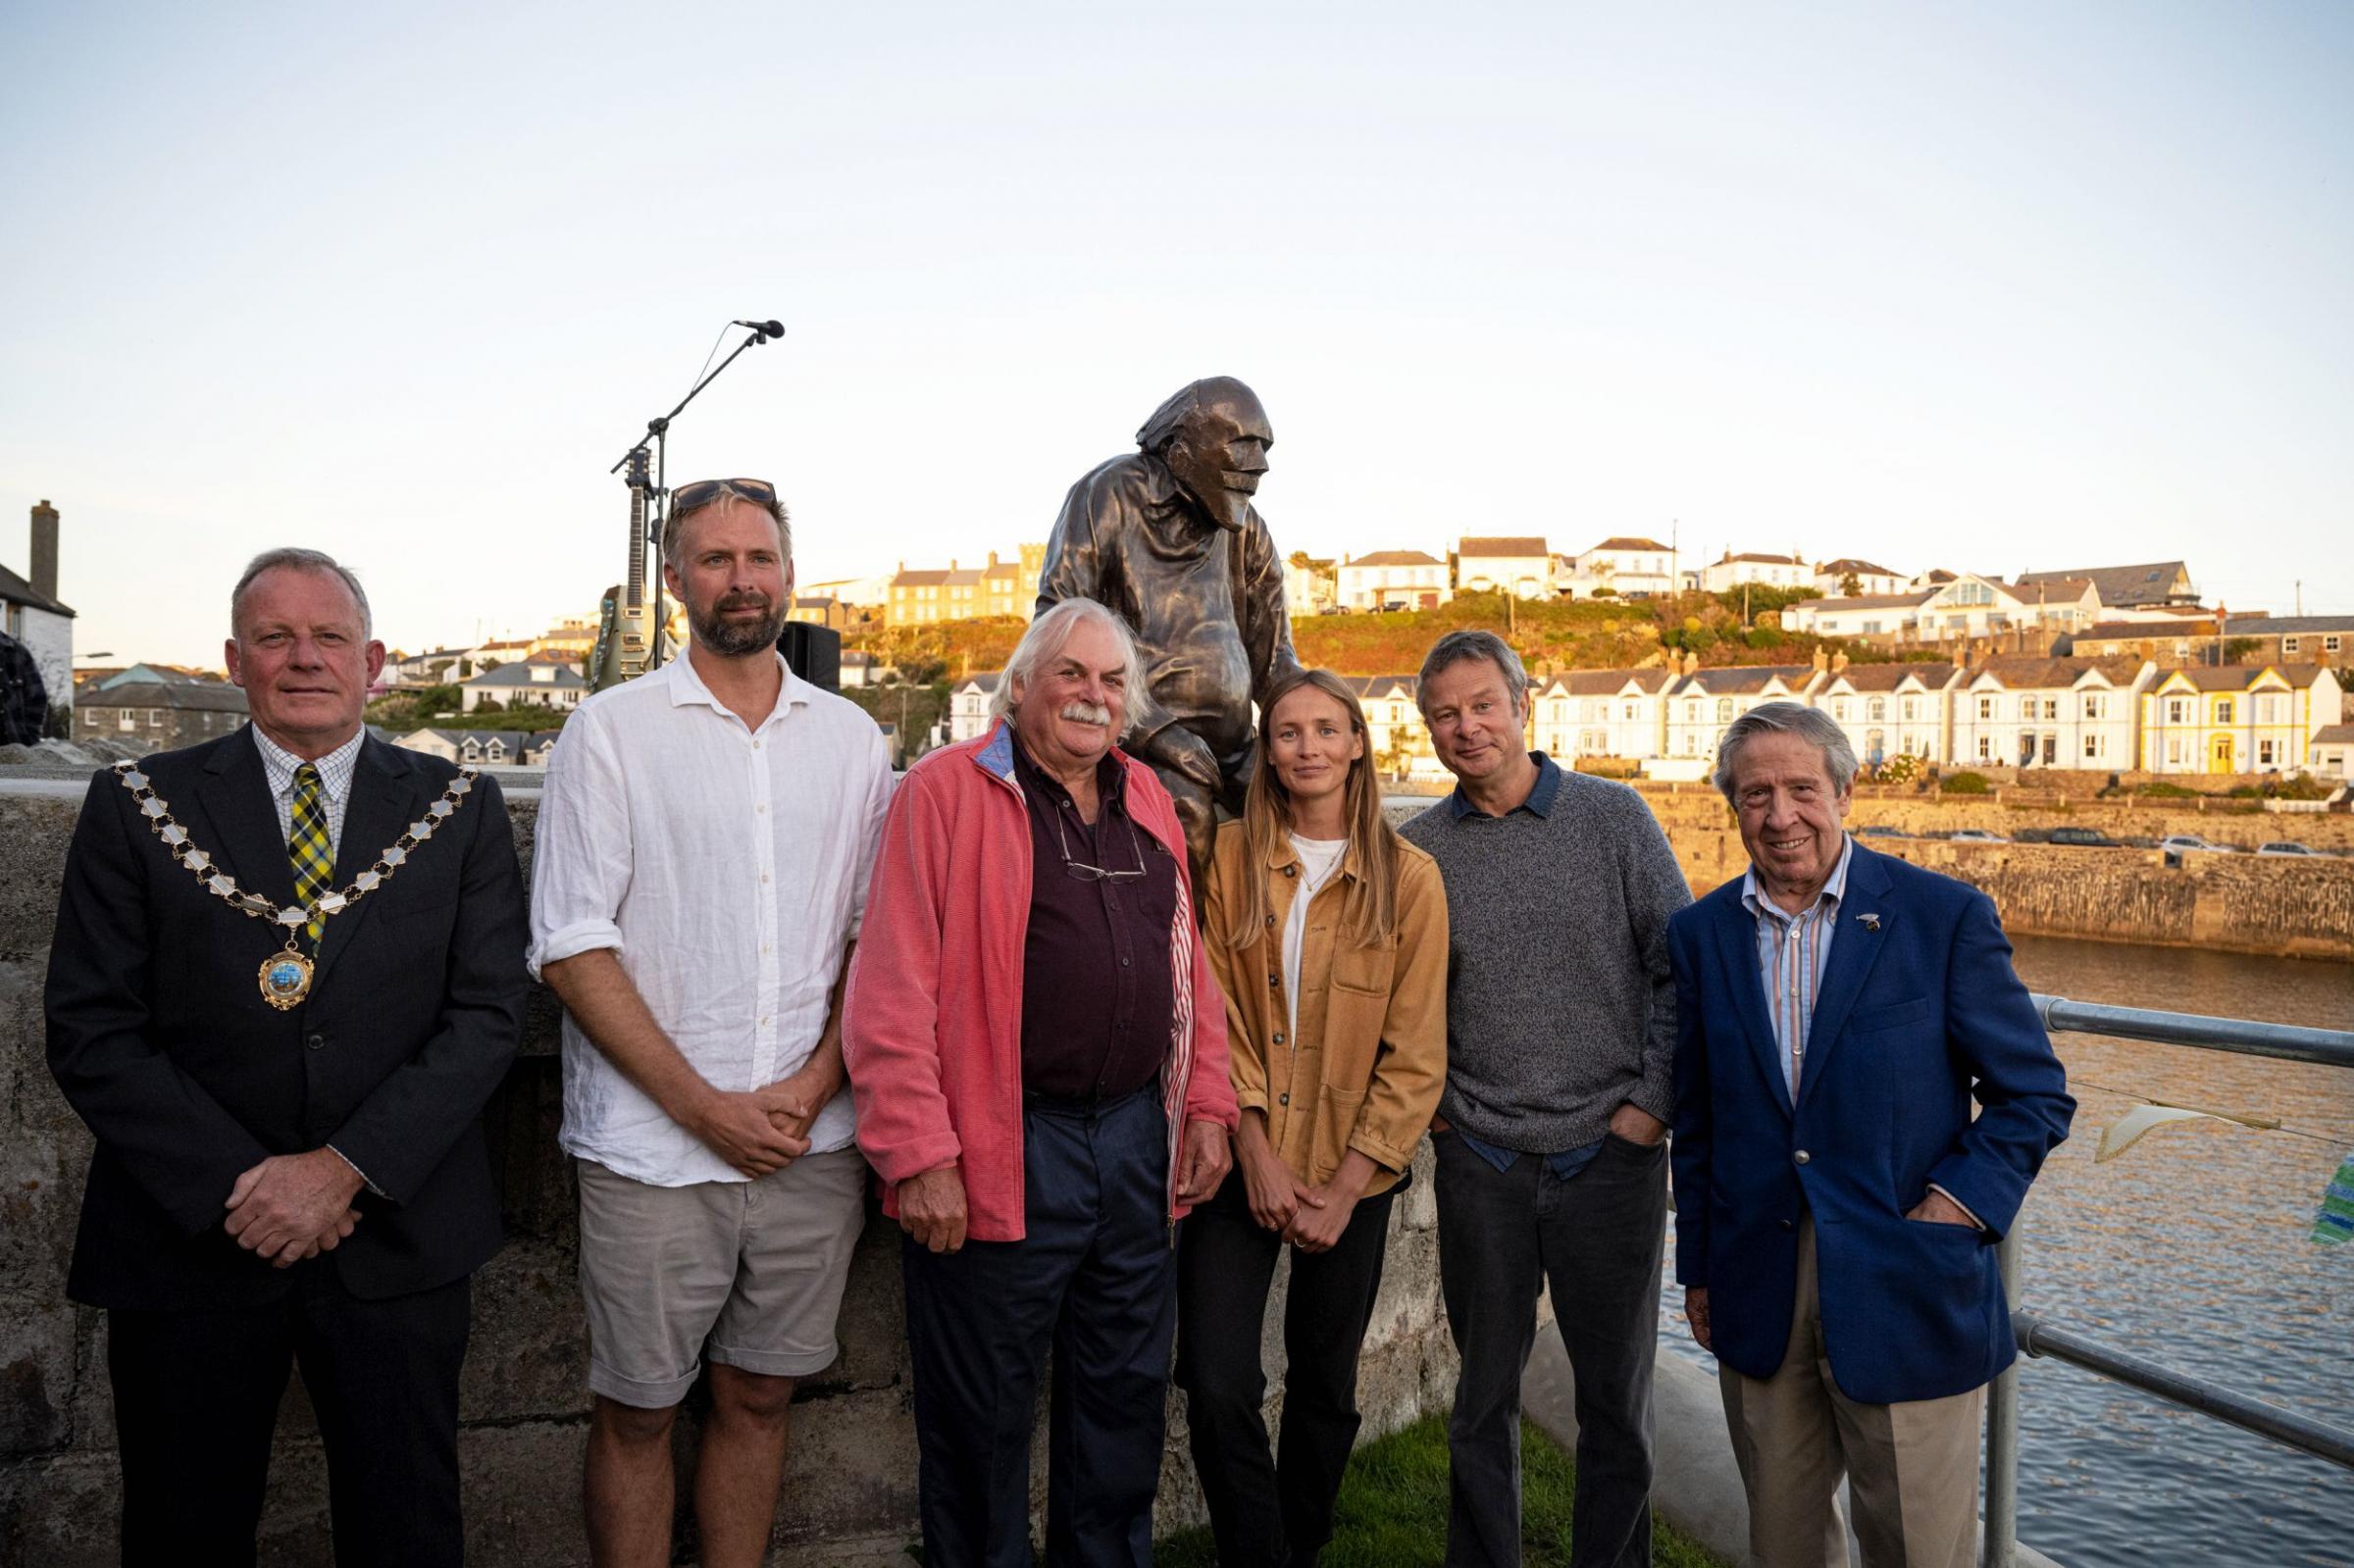 Mike Toy, Dan Crockett of Blue Marine Foundation, Dave Rogers, sculptor Holly Bendall, Hugh Fearnley Whittingstall and Trevor Osborne at the unveiling Picture: Kathy White